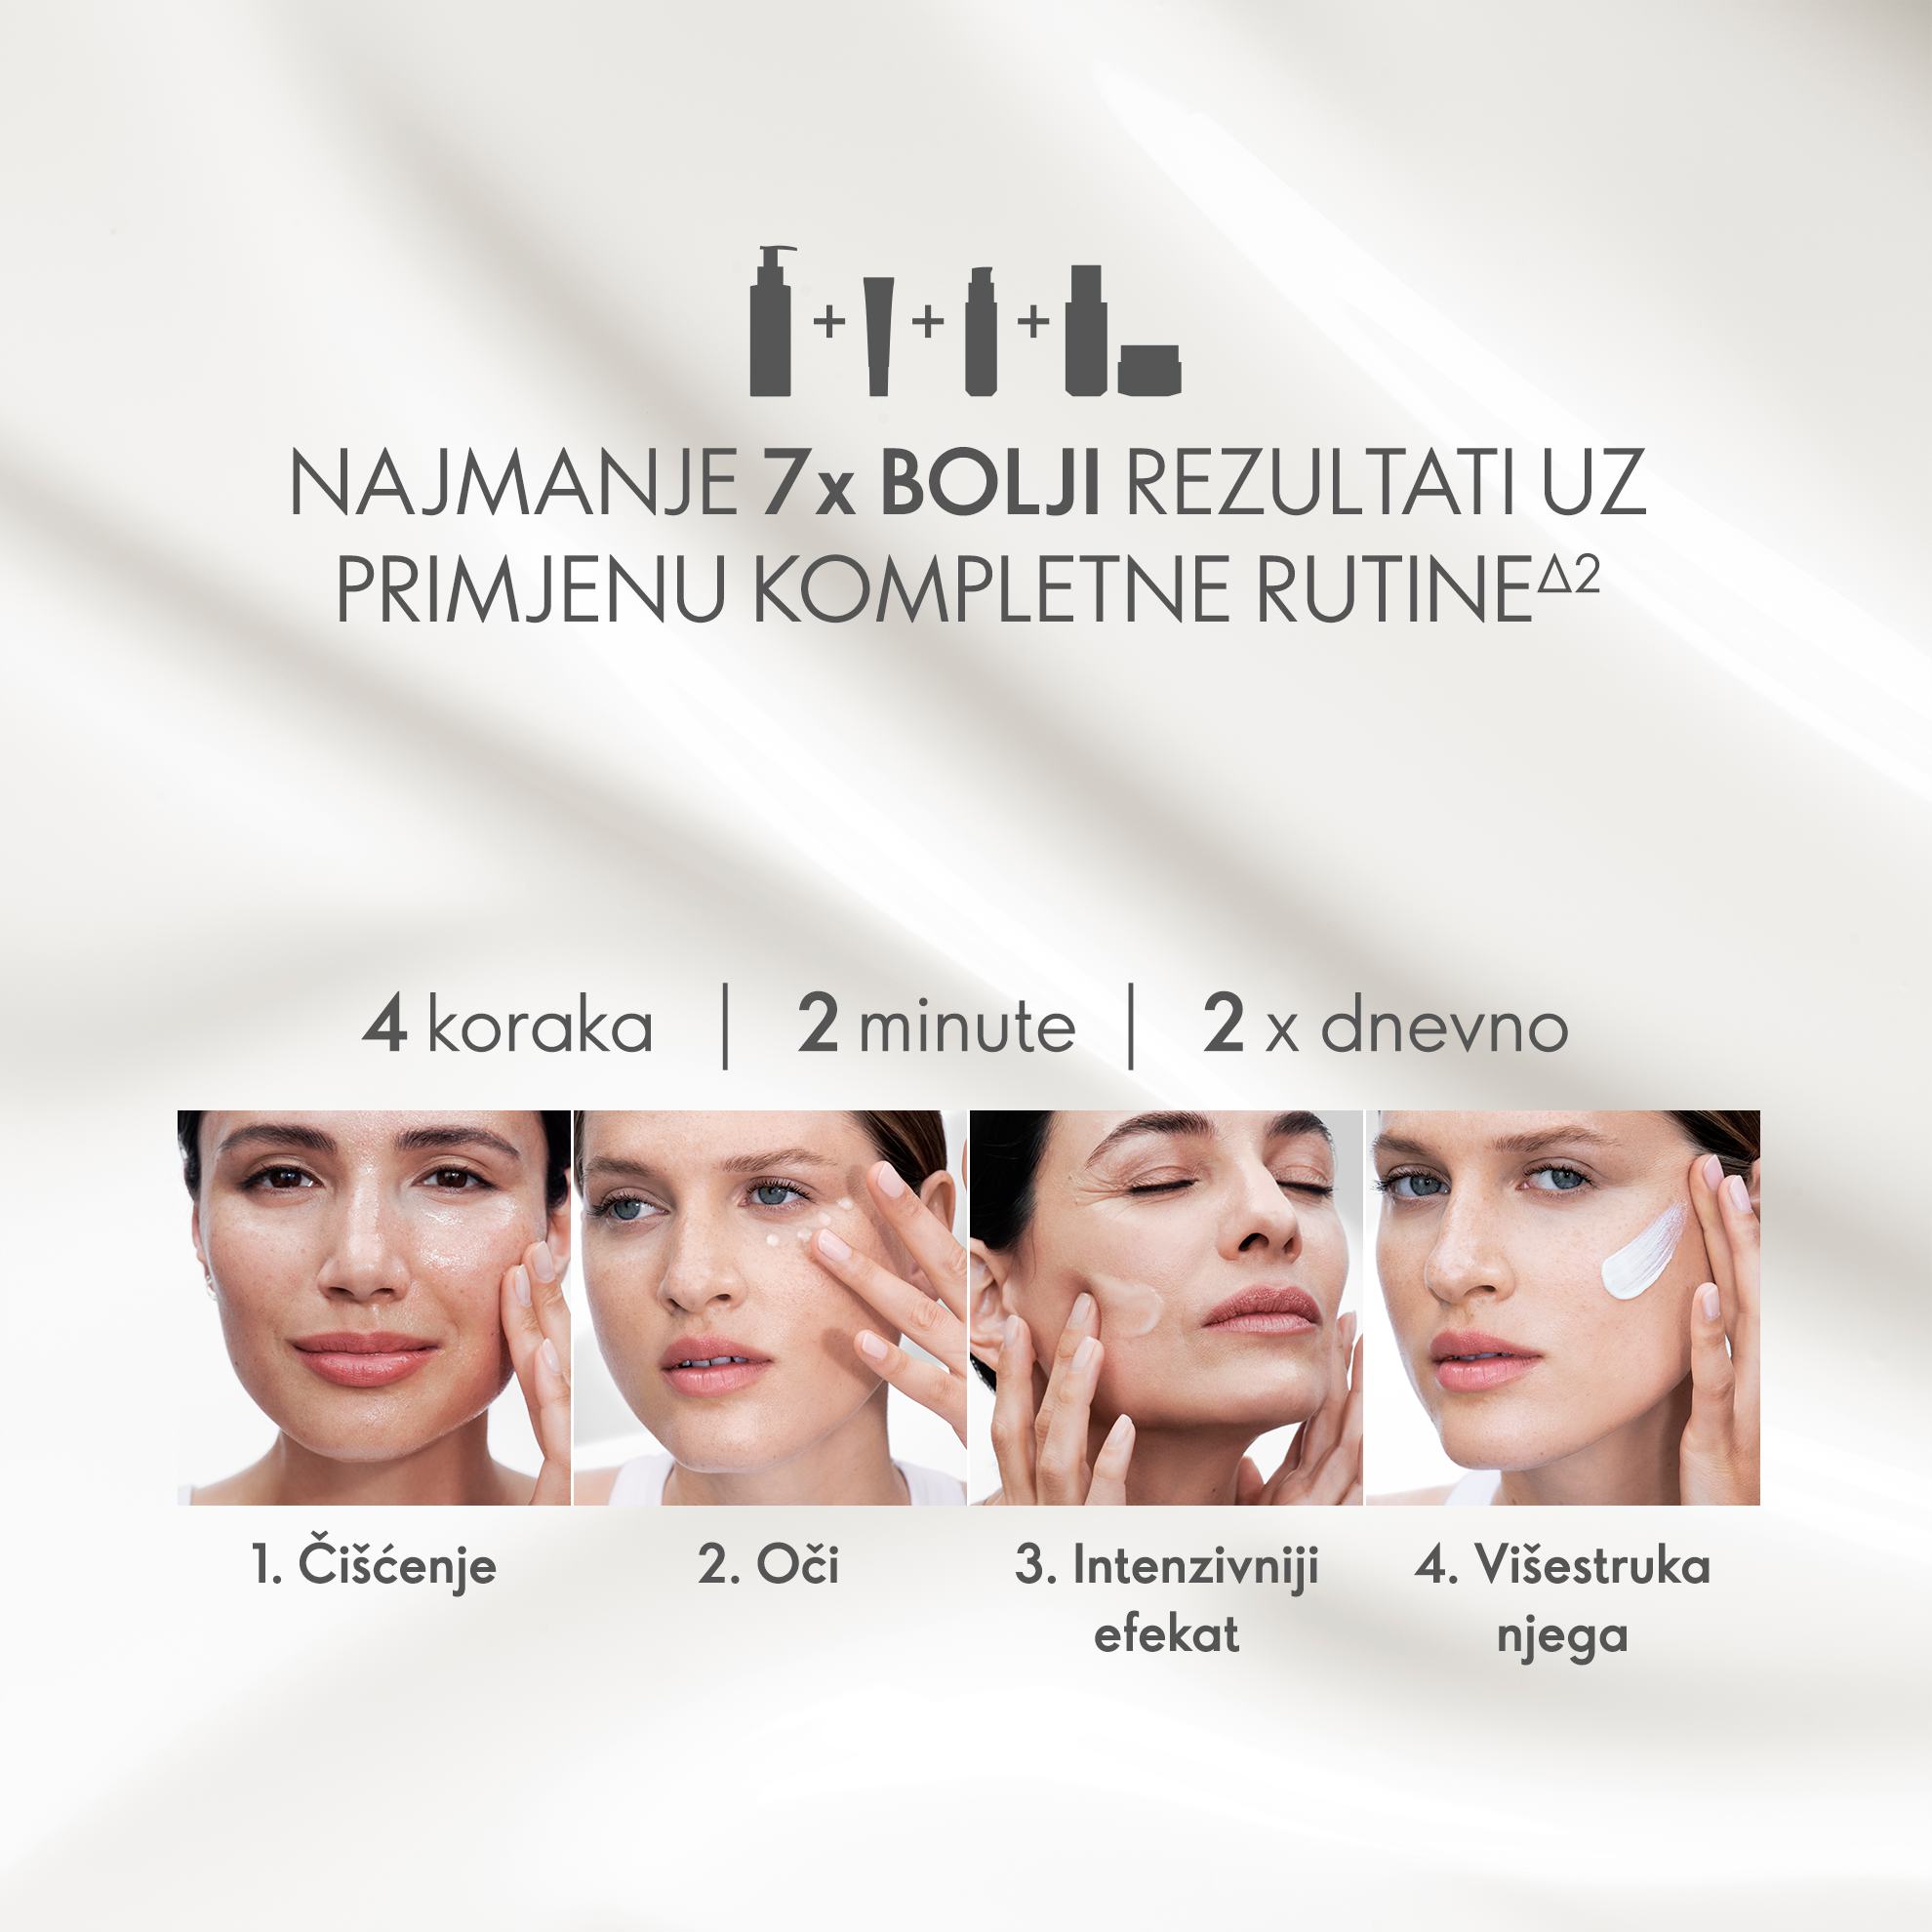 https://media-cdn.oriflame.com/productImage?externalMediaId=product-management-media%2fProducts%2f45590%2fBA%2f45590_5.png&id=17590793&version=2